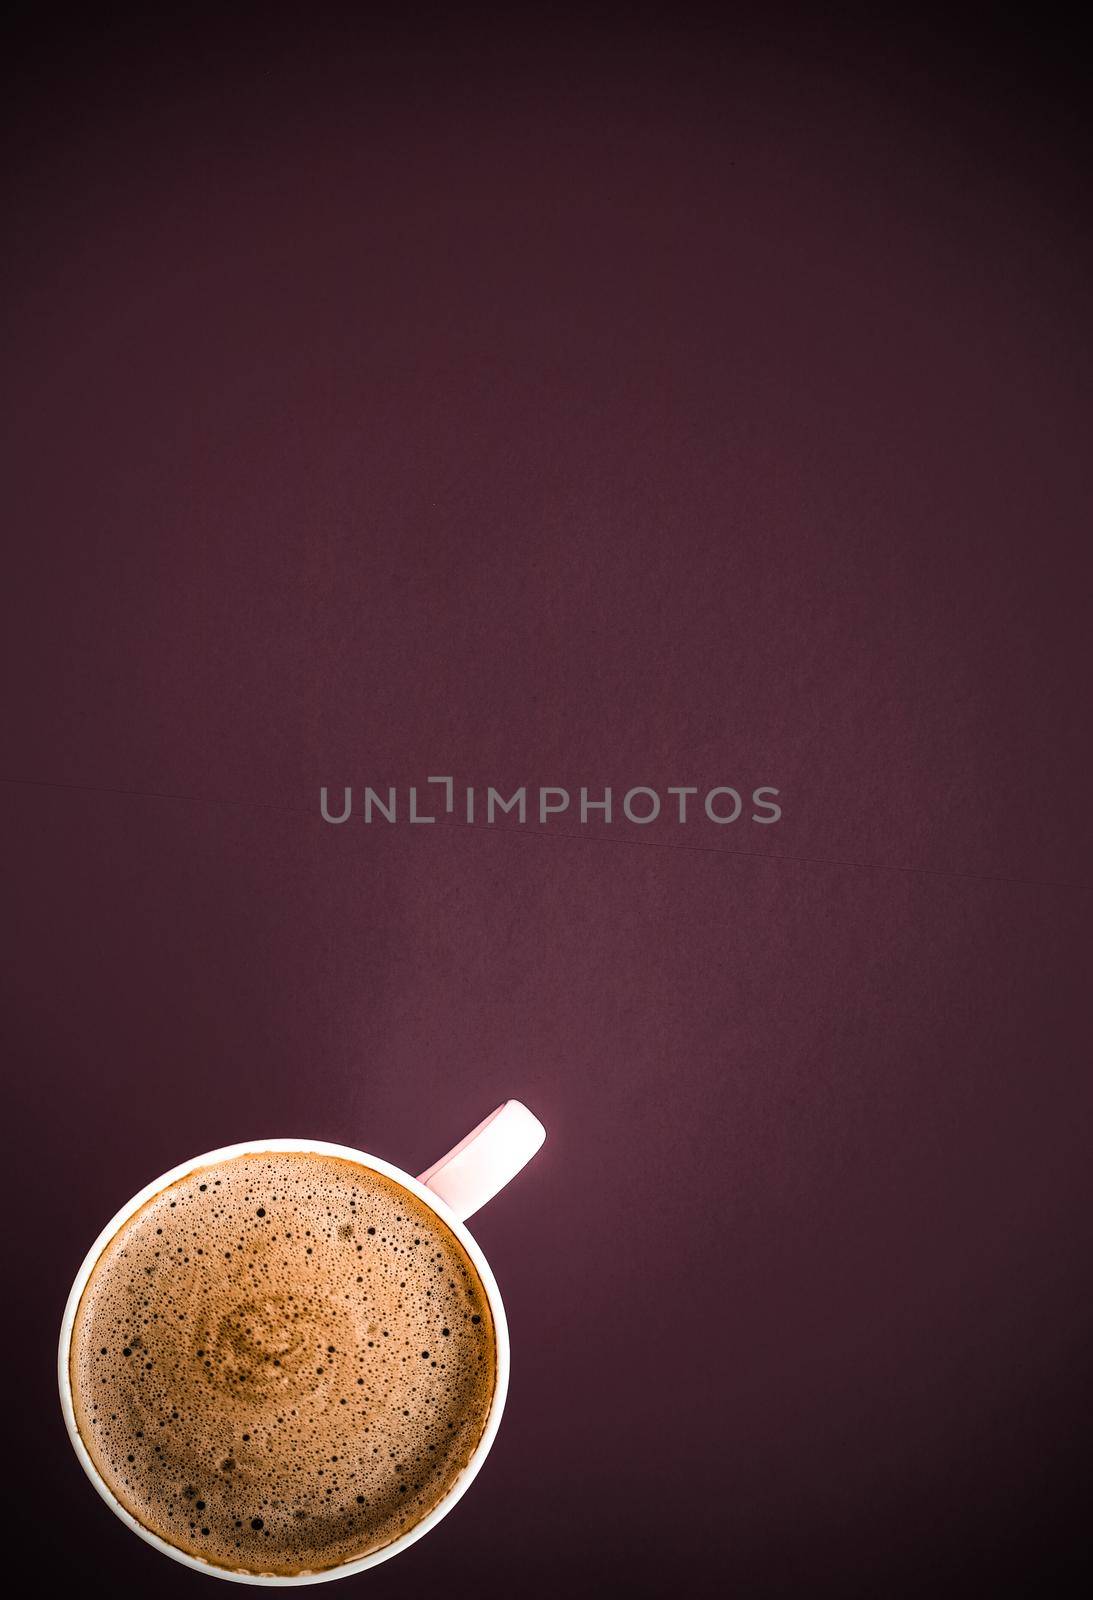 Hot drink, breakfast and vintage style concept - Coffee in the morning, flatlay background with copyspace